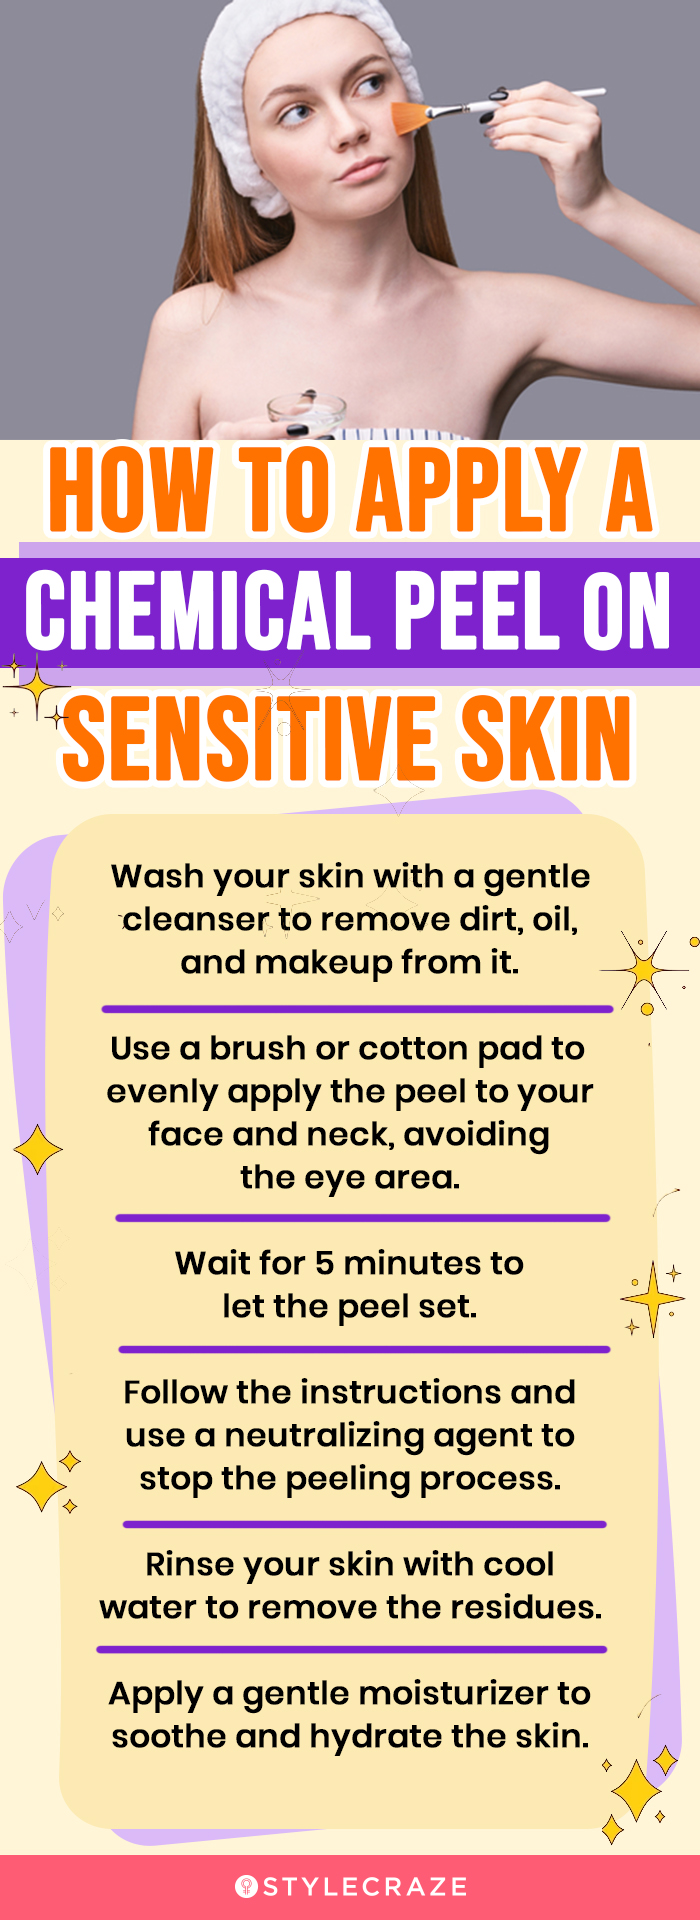 How To Apply A Chemical Peel On Sensitive Skin (infographic)